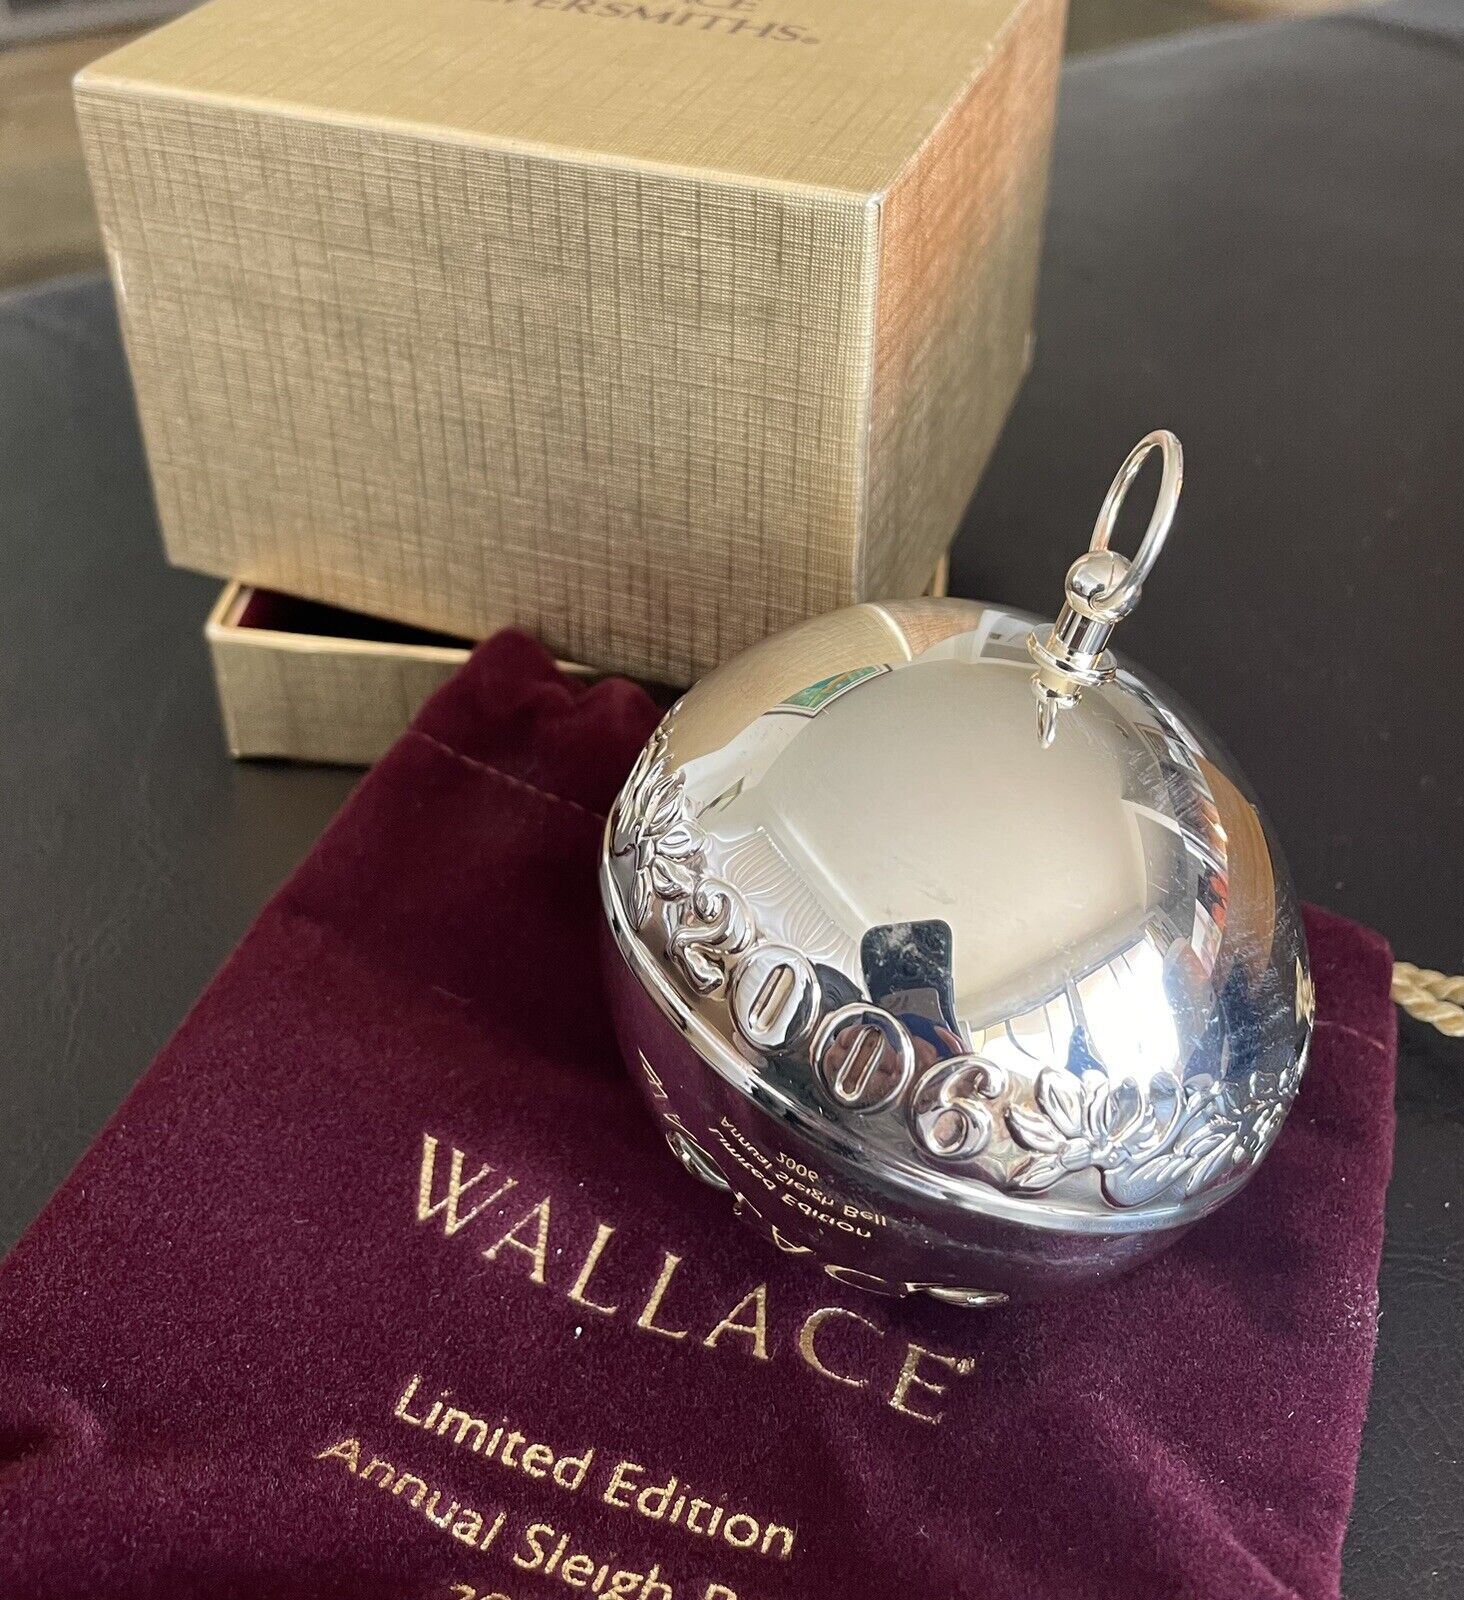 NEW 2006 Wallace Annual Silver Sleigh Bell- With Box &Bag